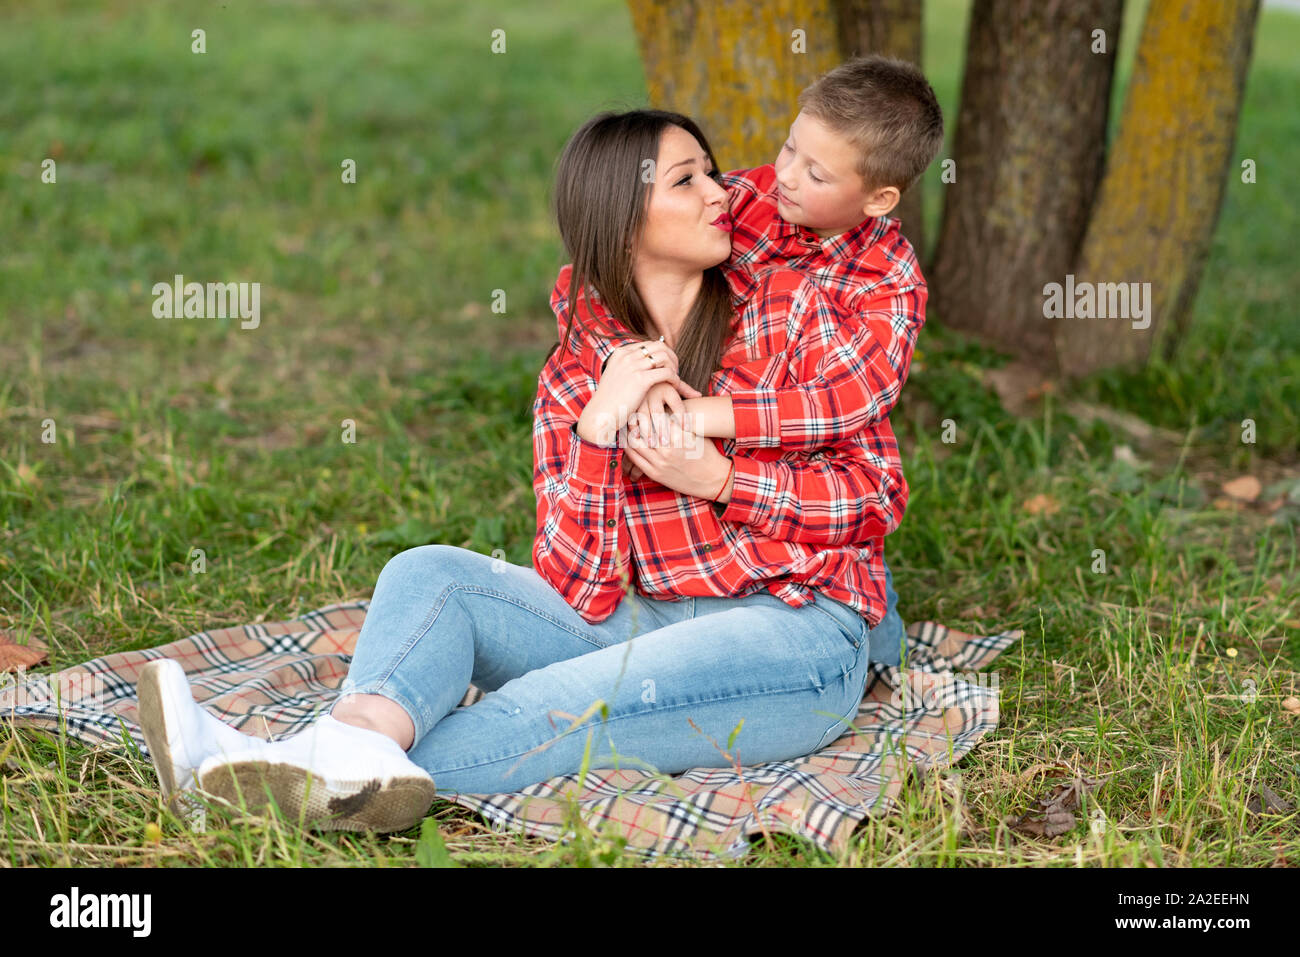 The son gently hugs mom on the shoulders, who sits on a checkered bedspread. Stock Photo